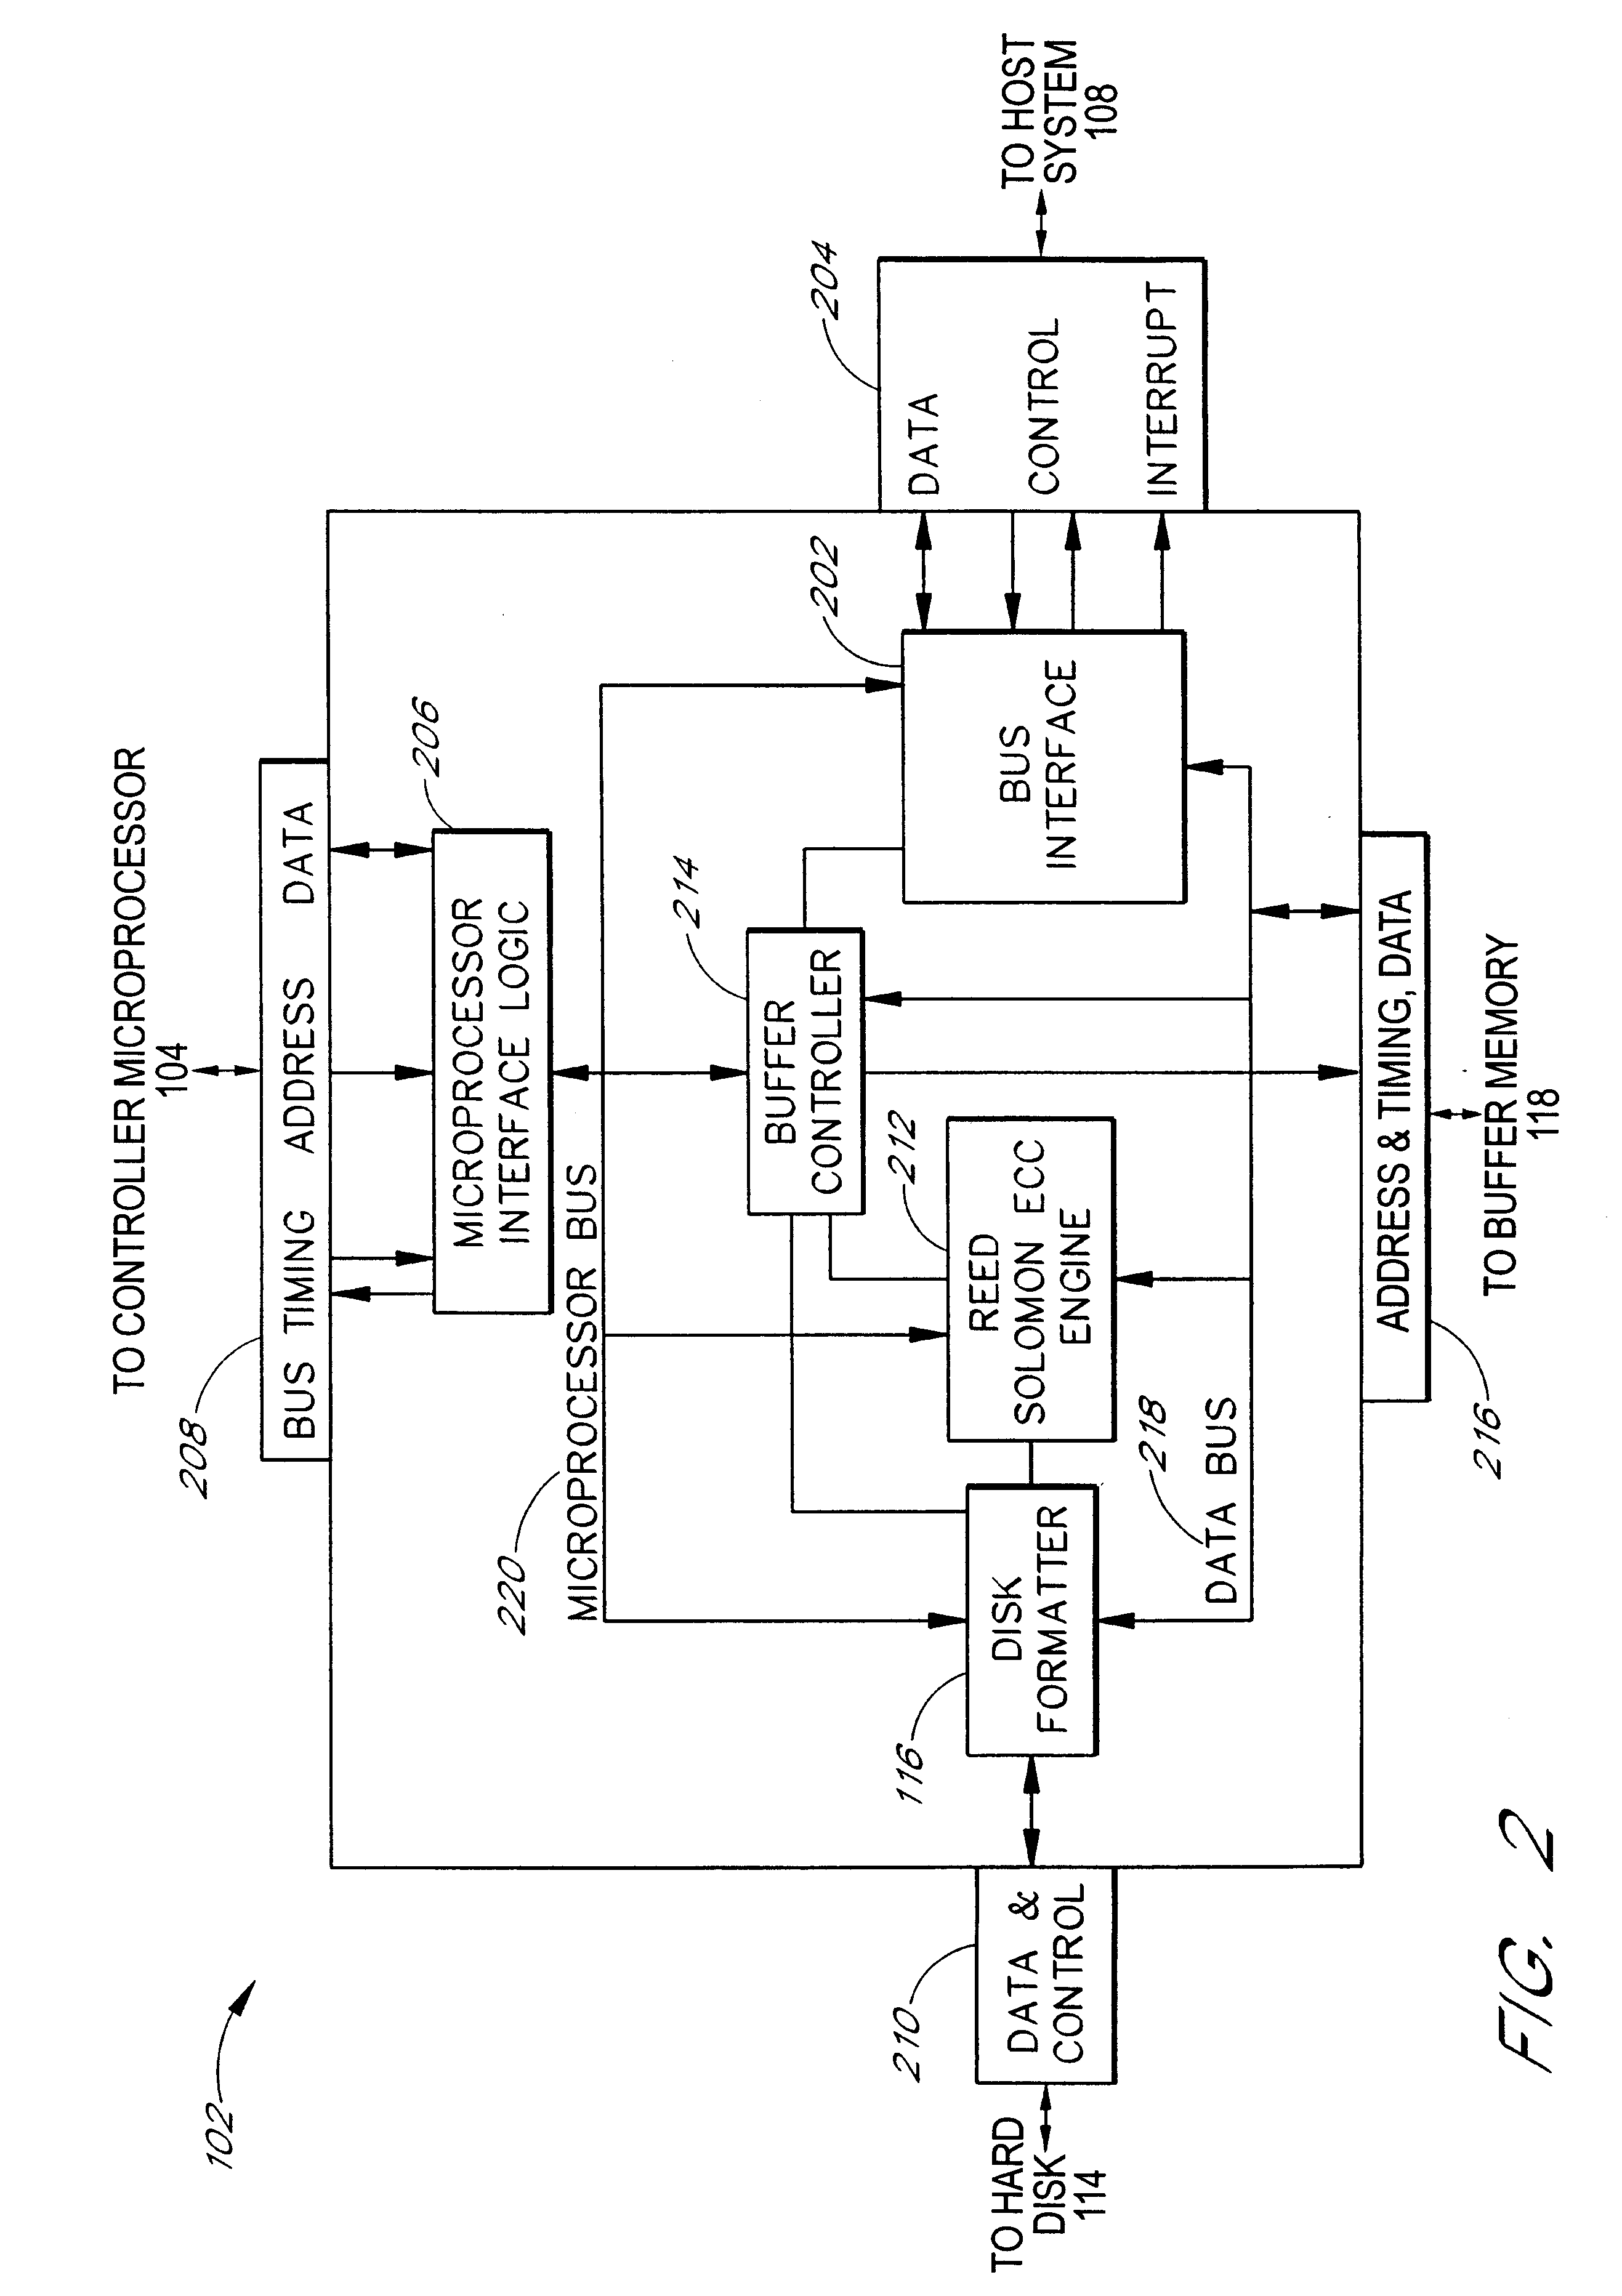 Methods and systems for arbitrating access to a disk controller buffer memory by allocating various amounts of times to different accessing units